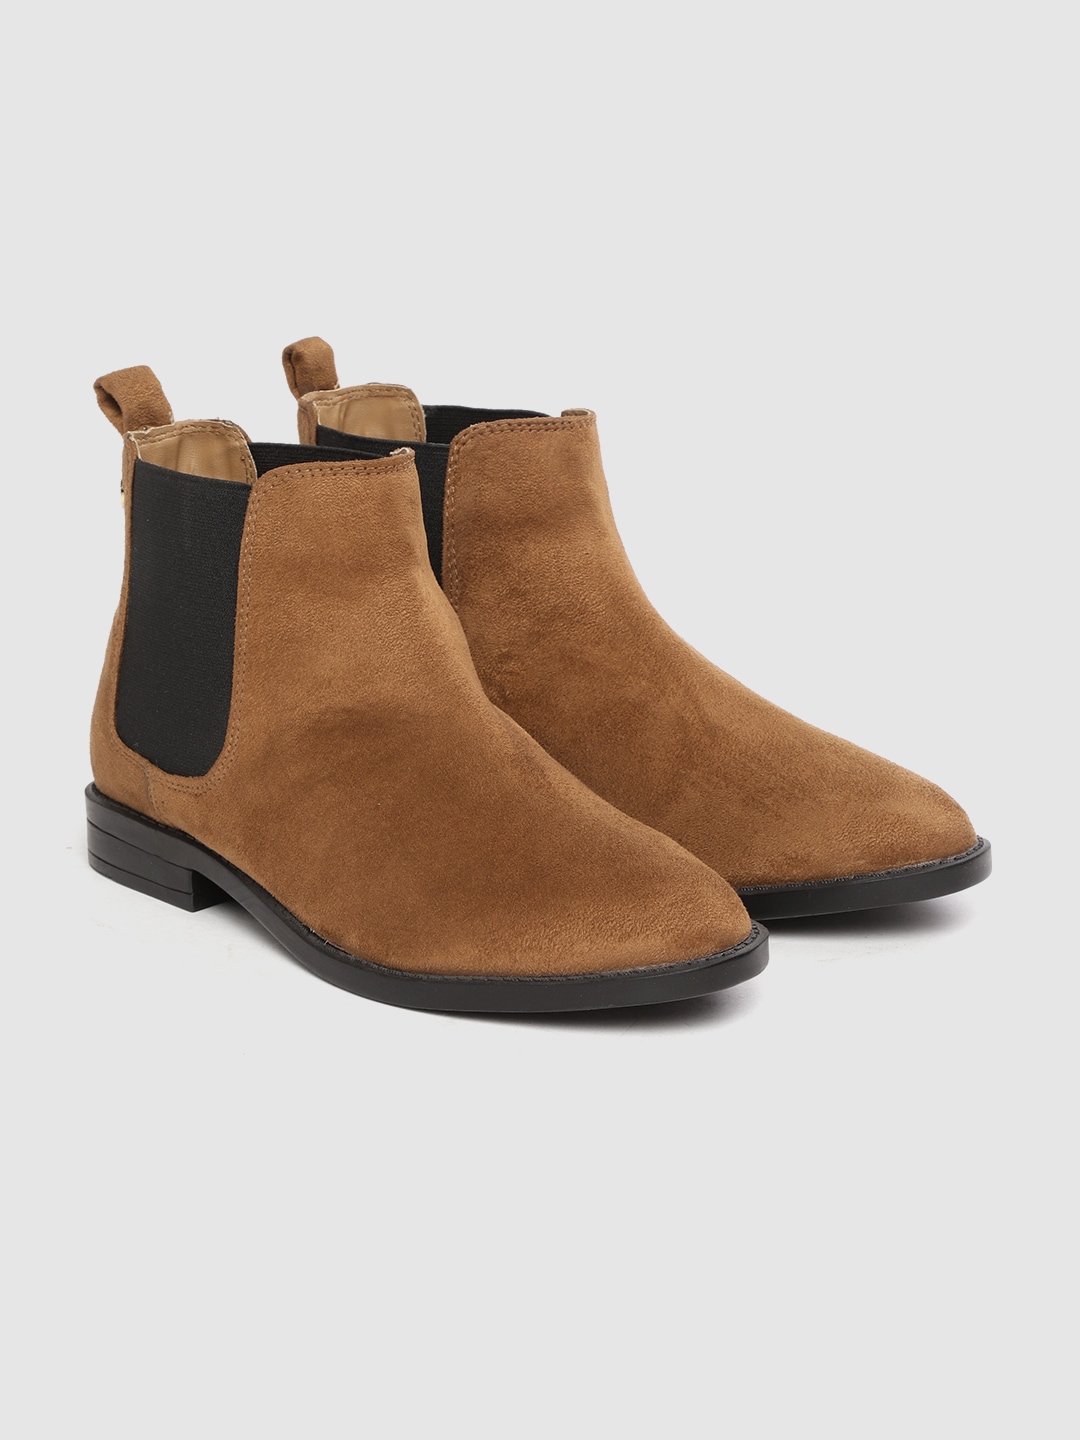 Carlton London Women Camel Brown Solid Mid-Top Flat Chelsea Boots Price in India